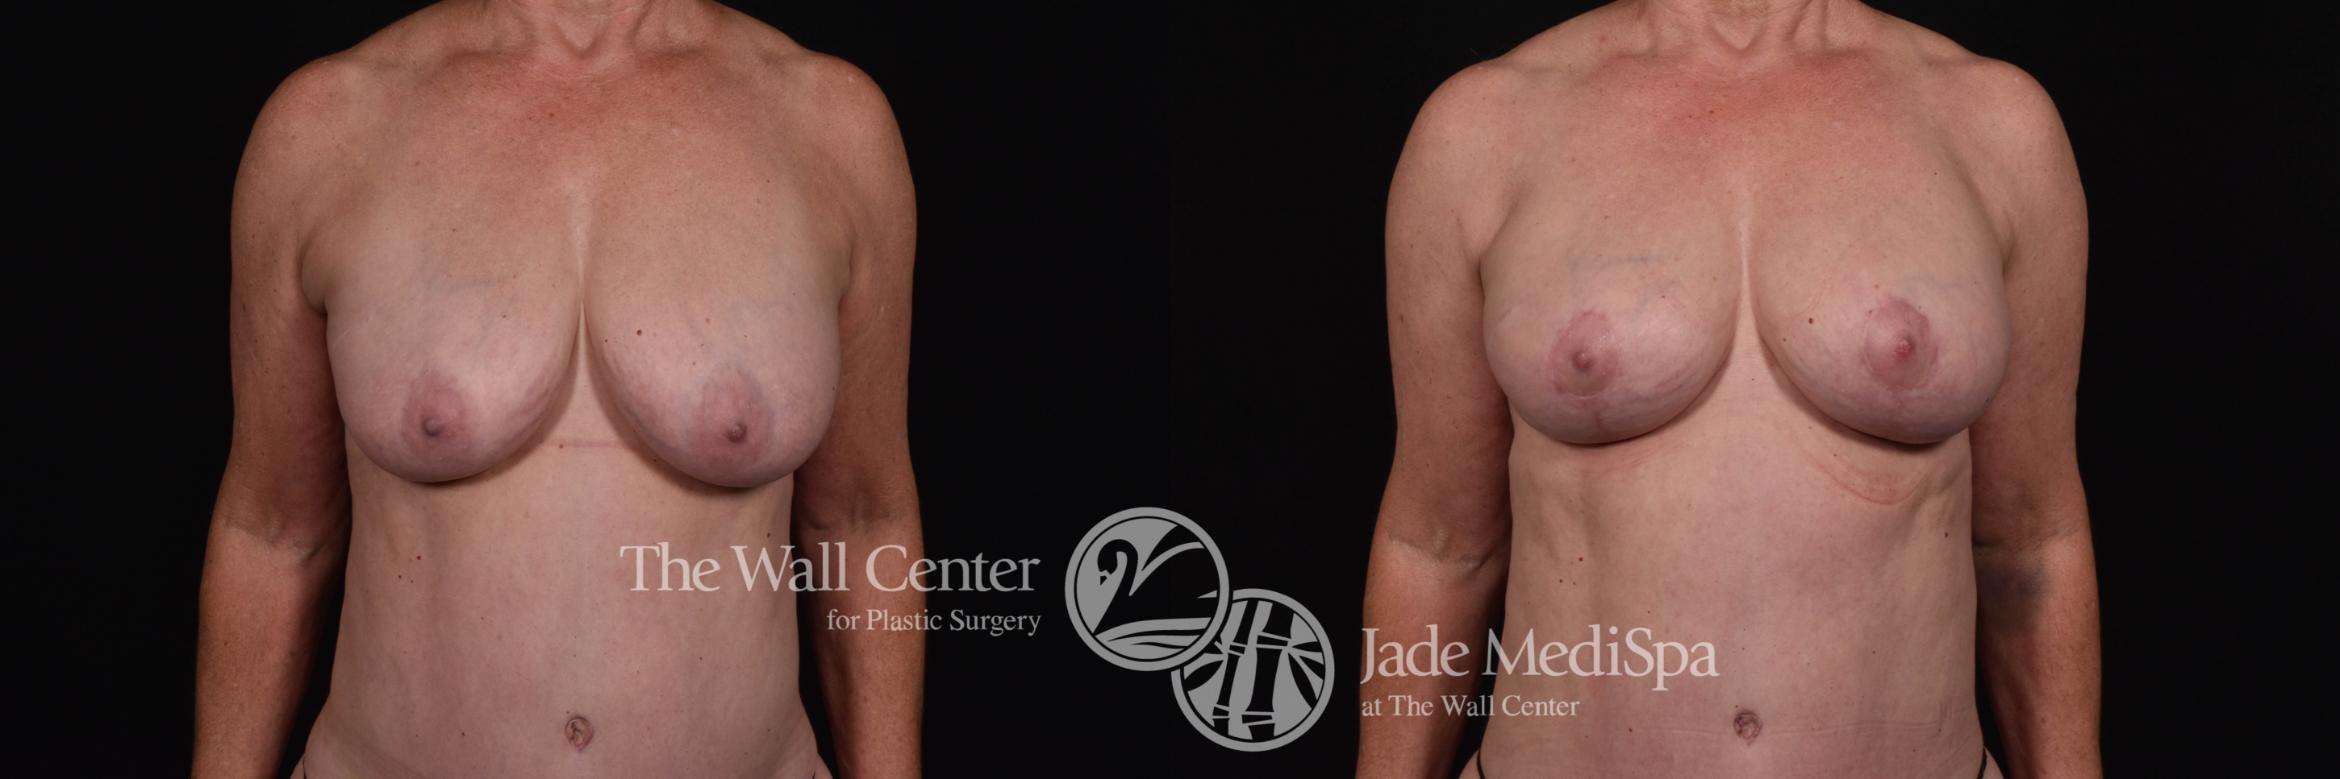 Breast Implant Exchange with Lift & SAFELipo Front Photo, Shreveport, Louisiana, The Wall Center for Plastic Surgery, Case 872